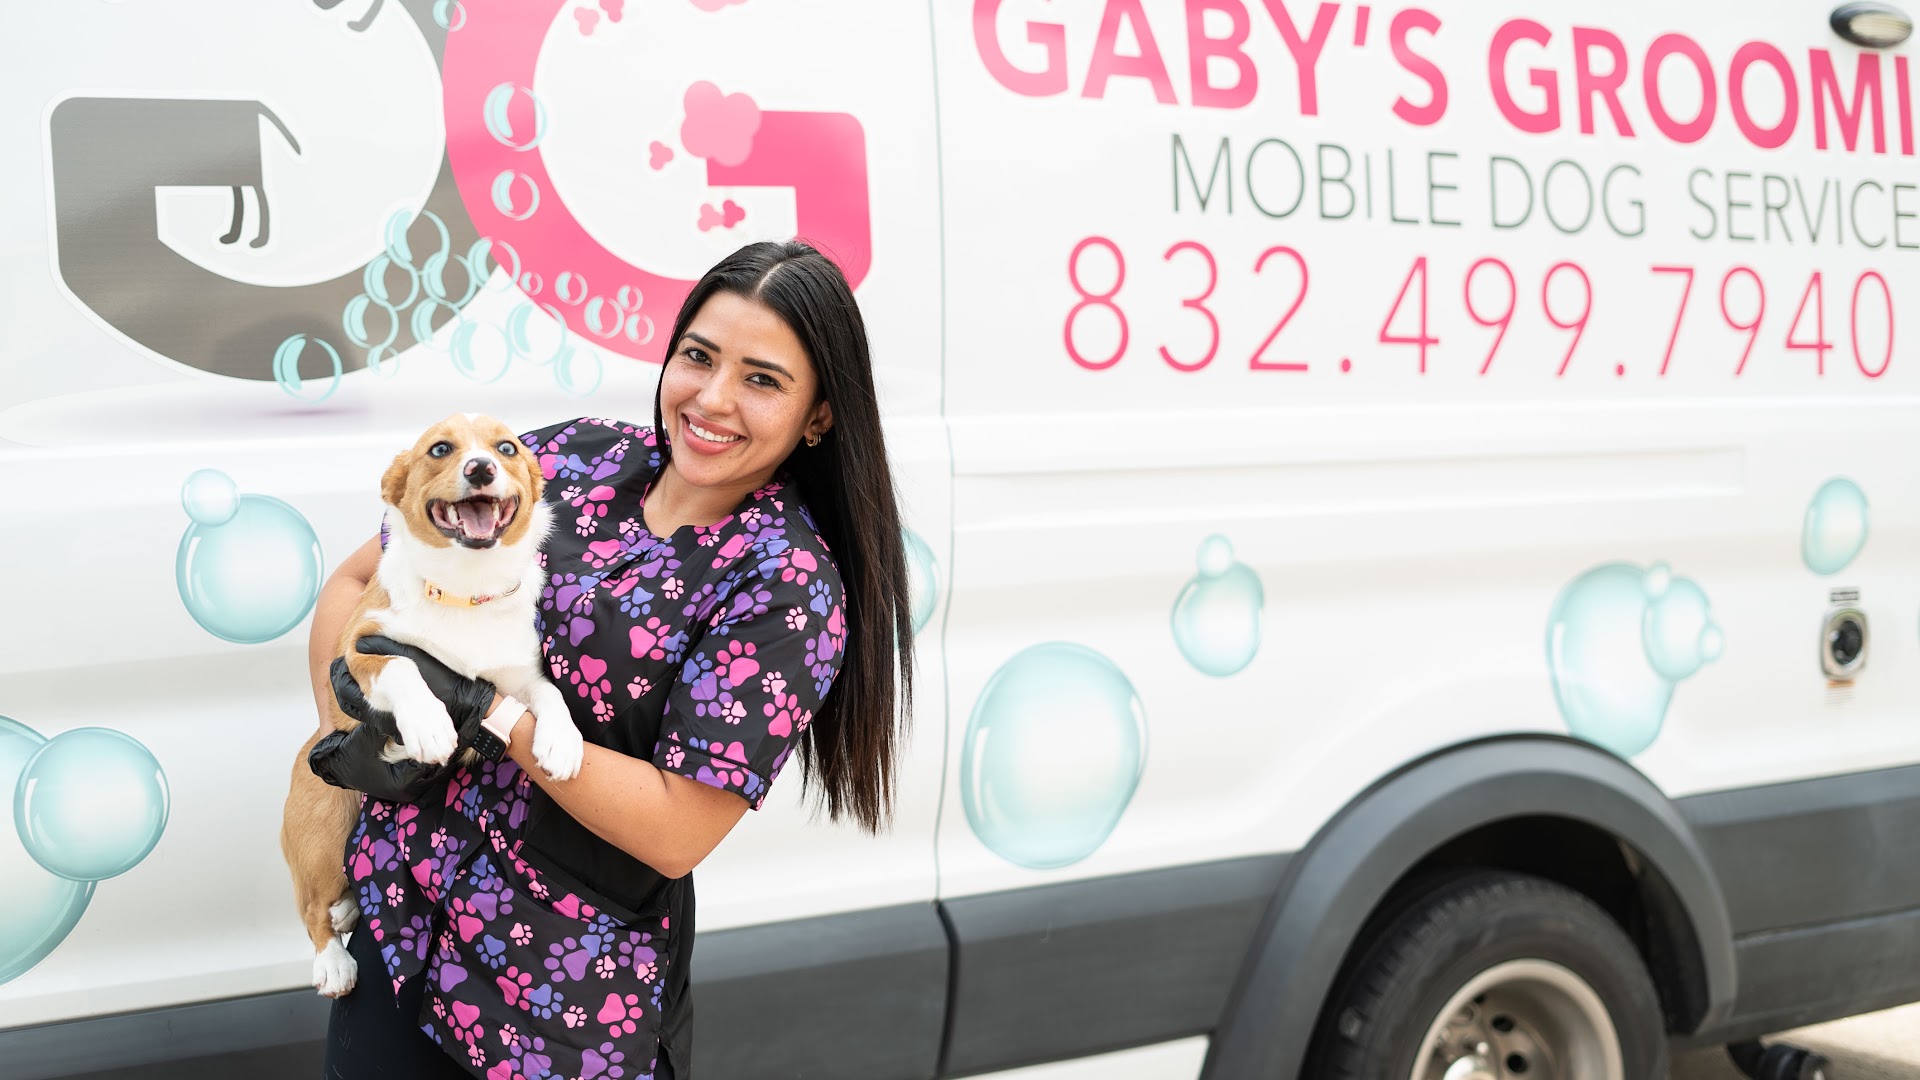 Gaby's Grooming Mobile Dog Services